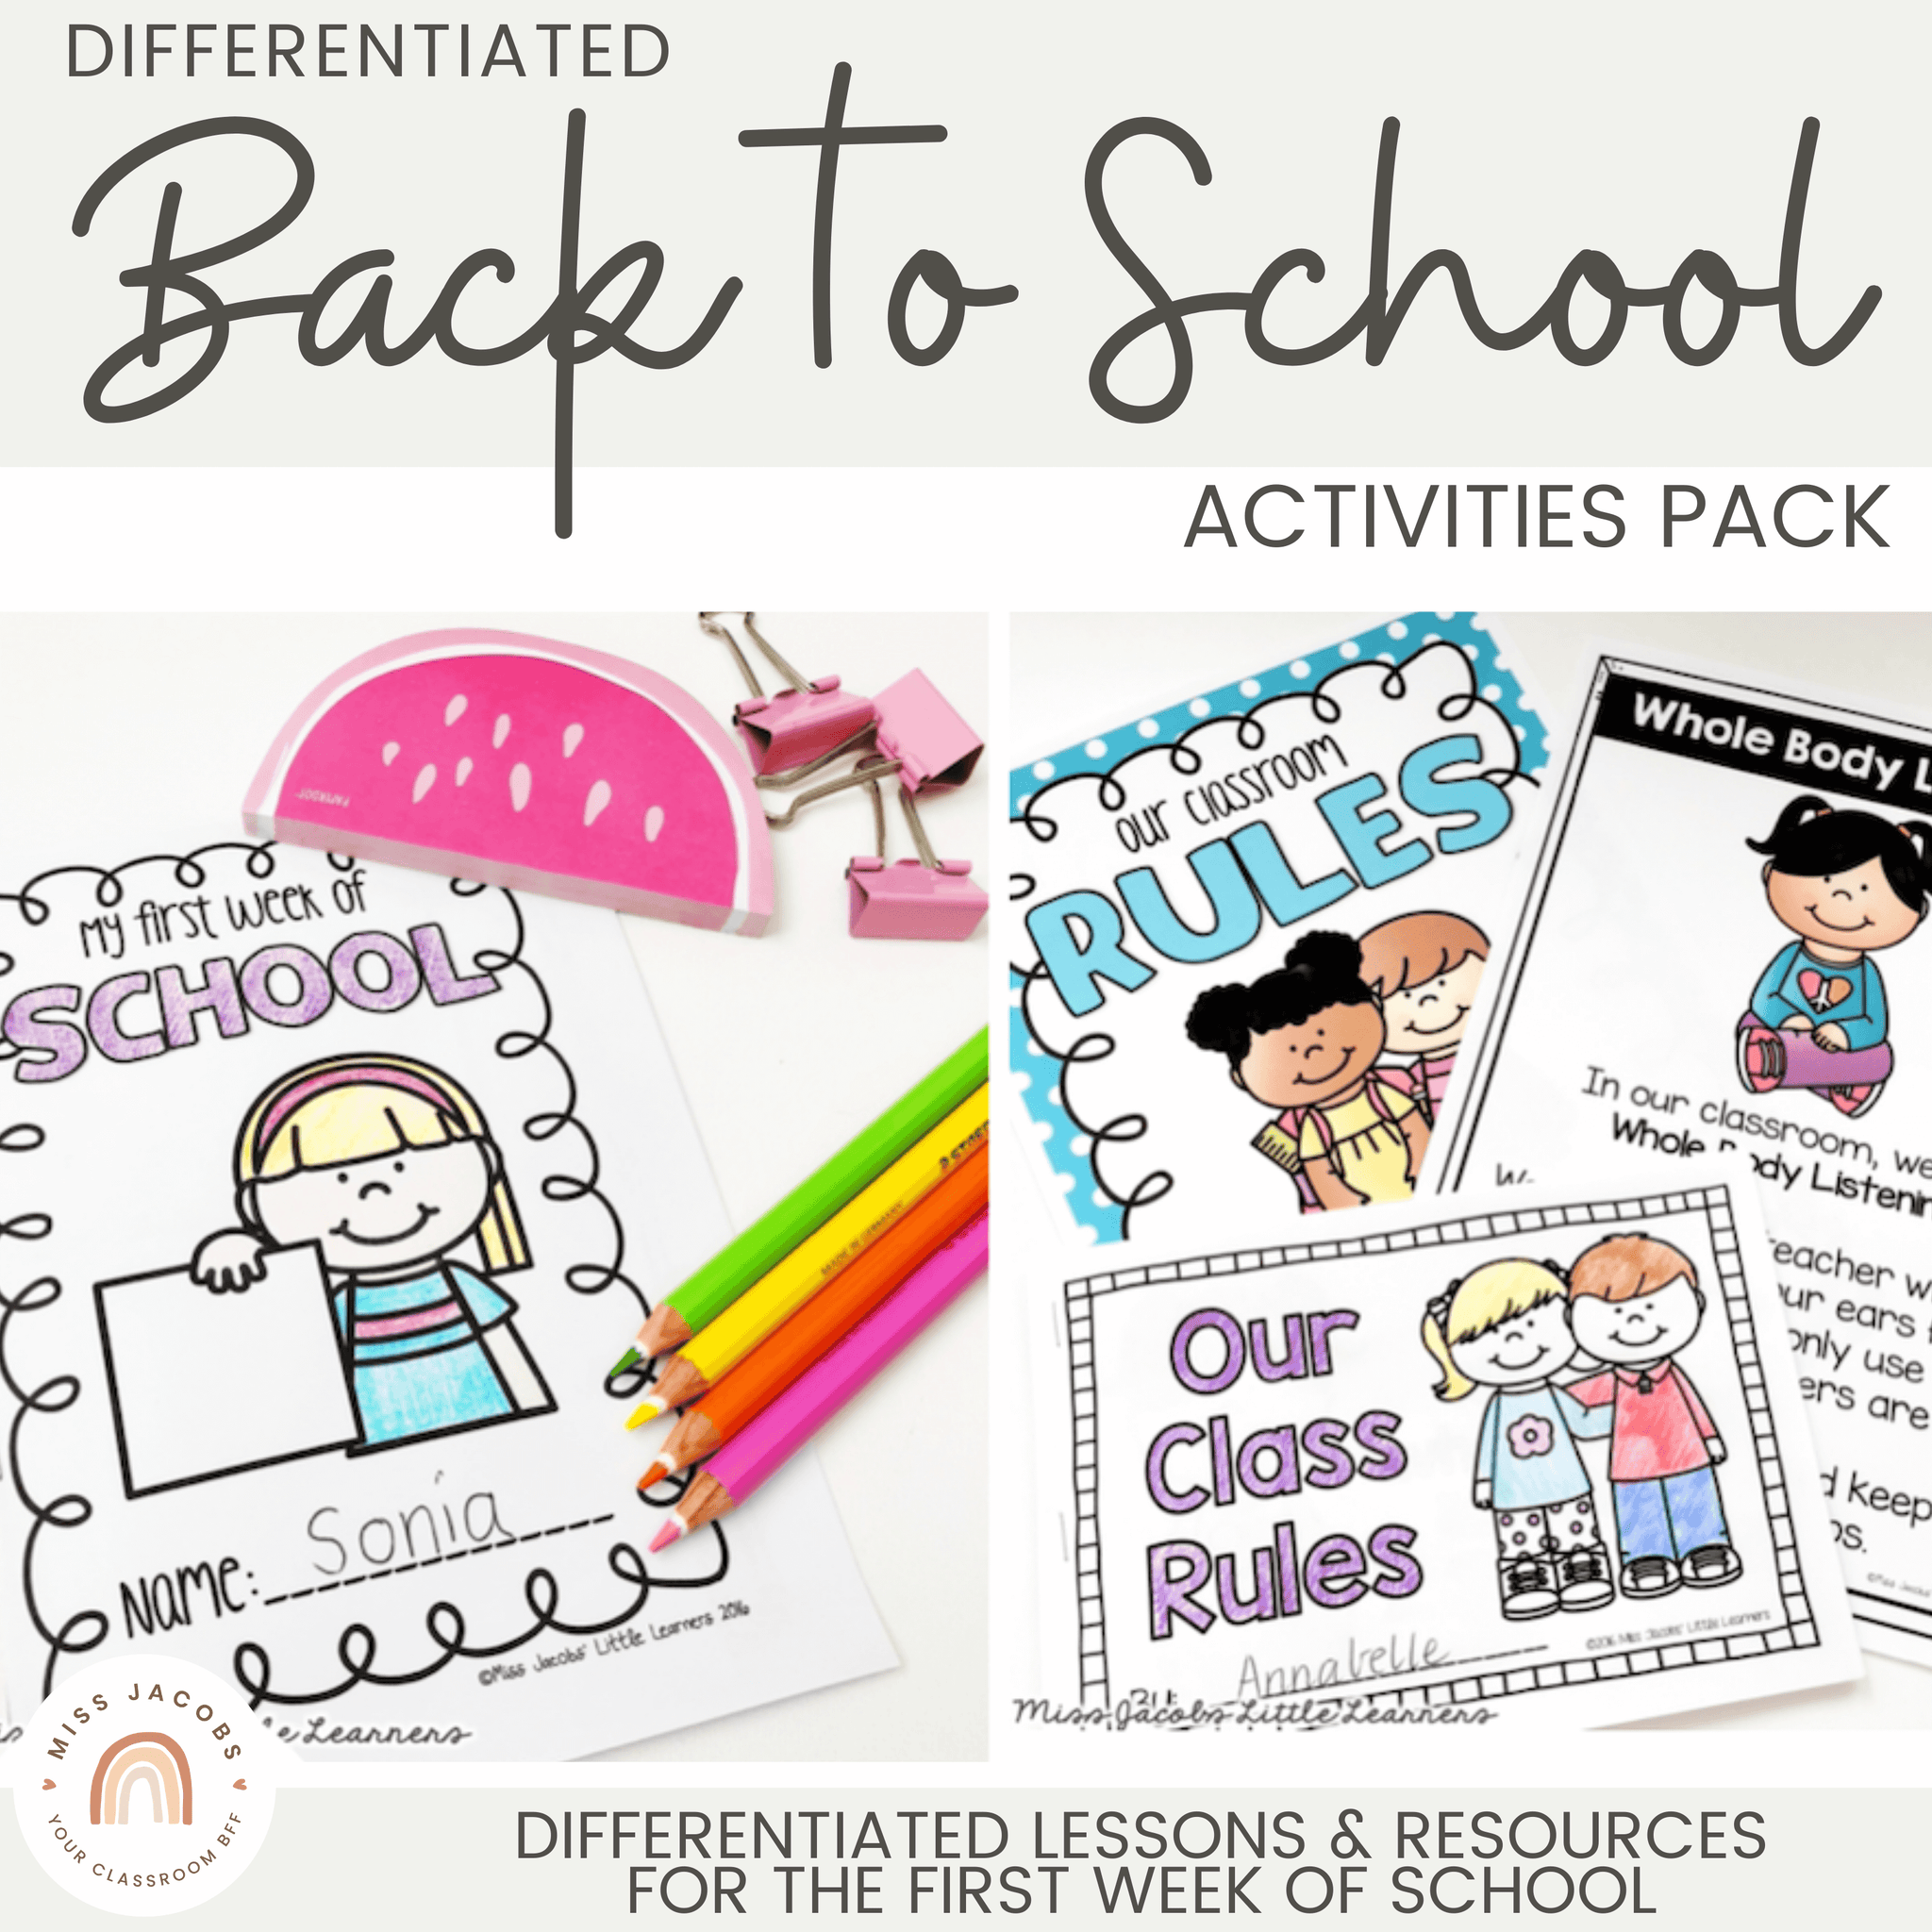 A graphic for my Back to School Activities Pack, featuring pictures of the activities. They are printed on white card with illustrations of children alongside the text.